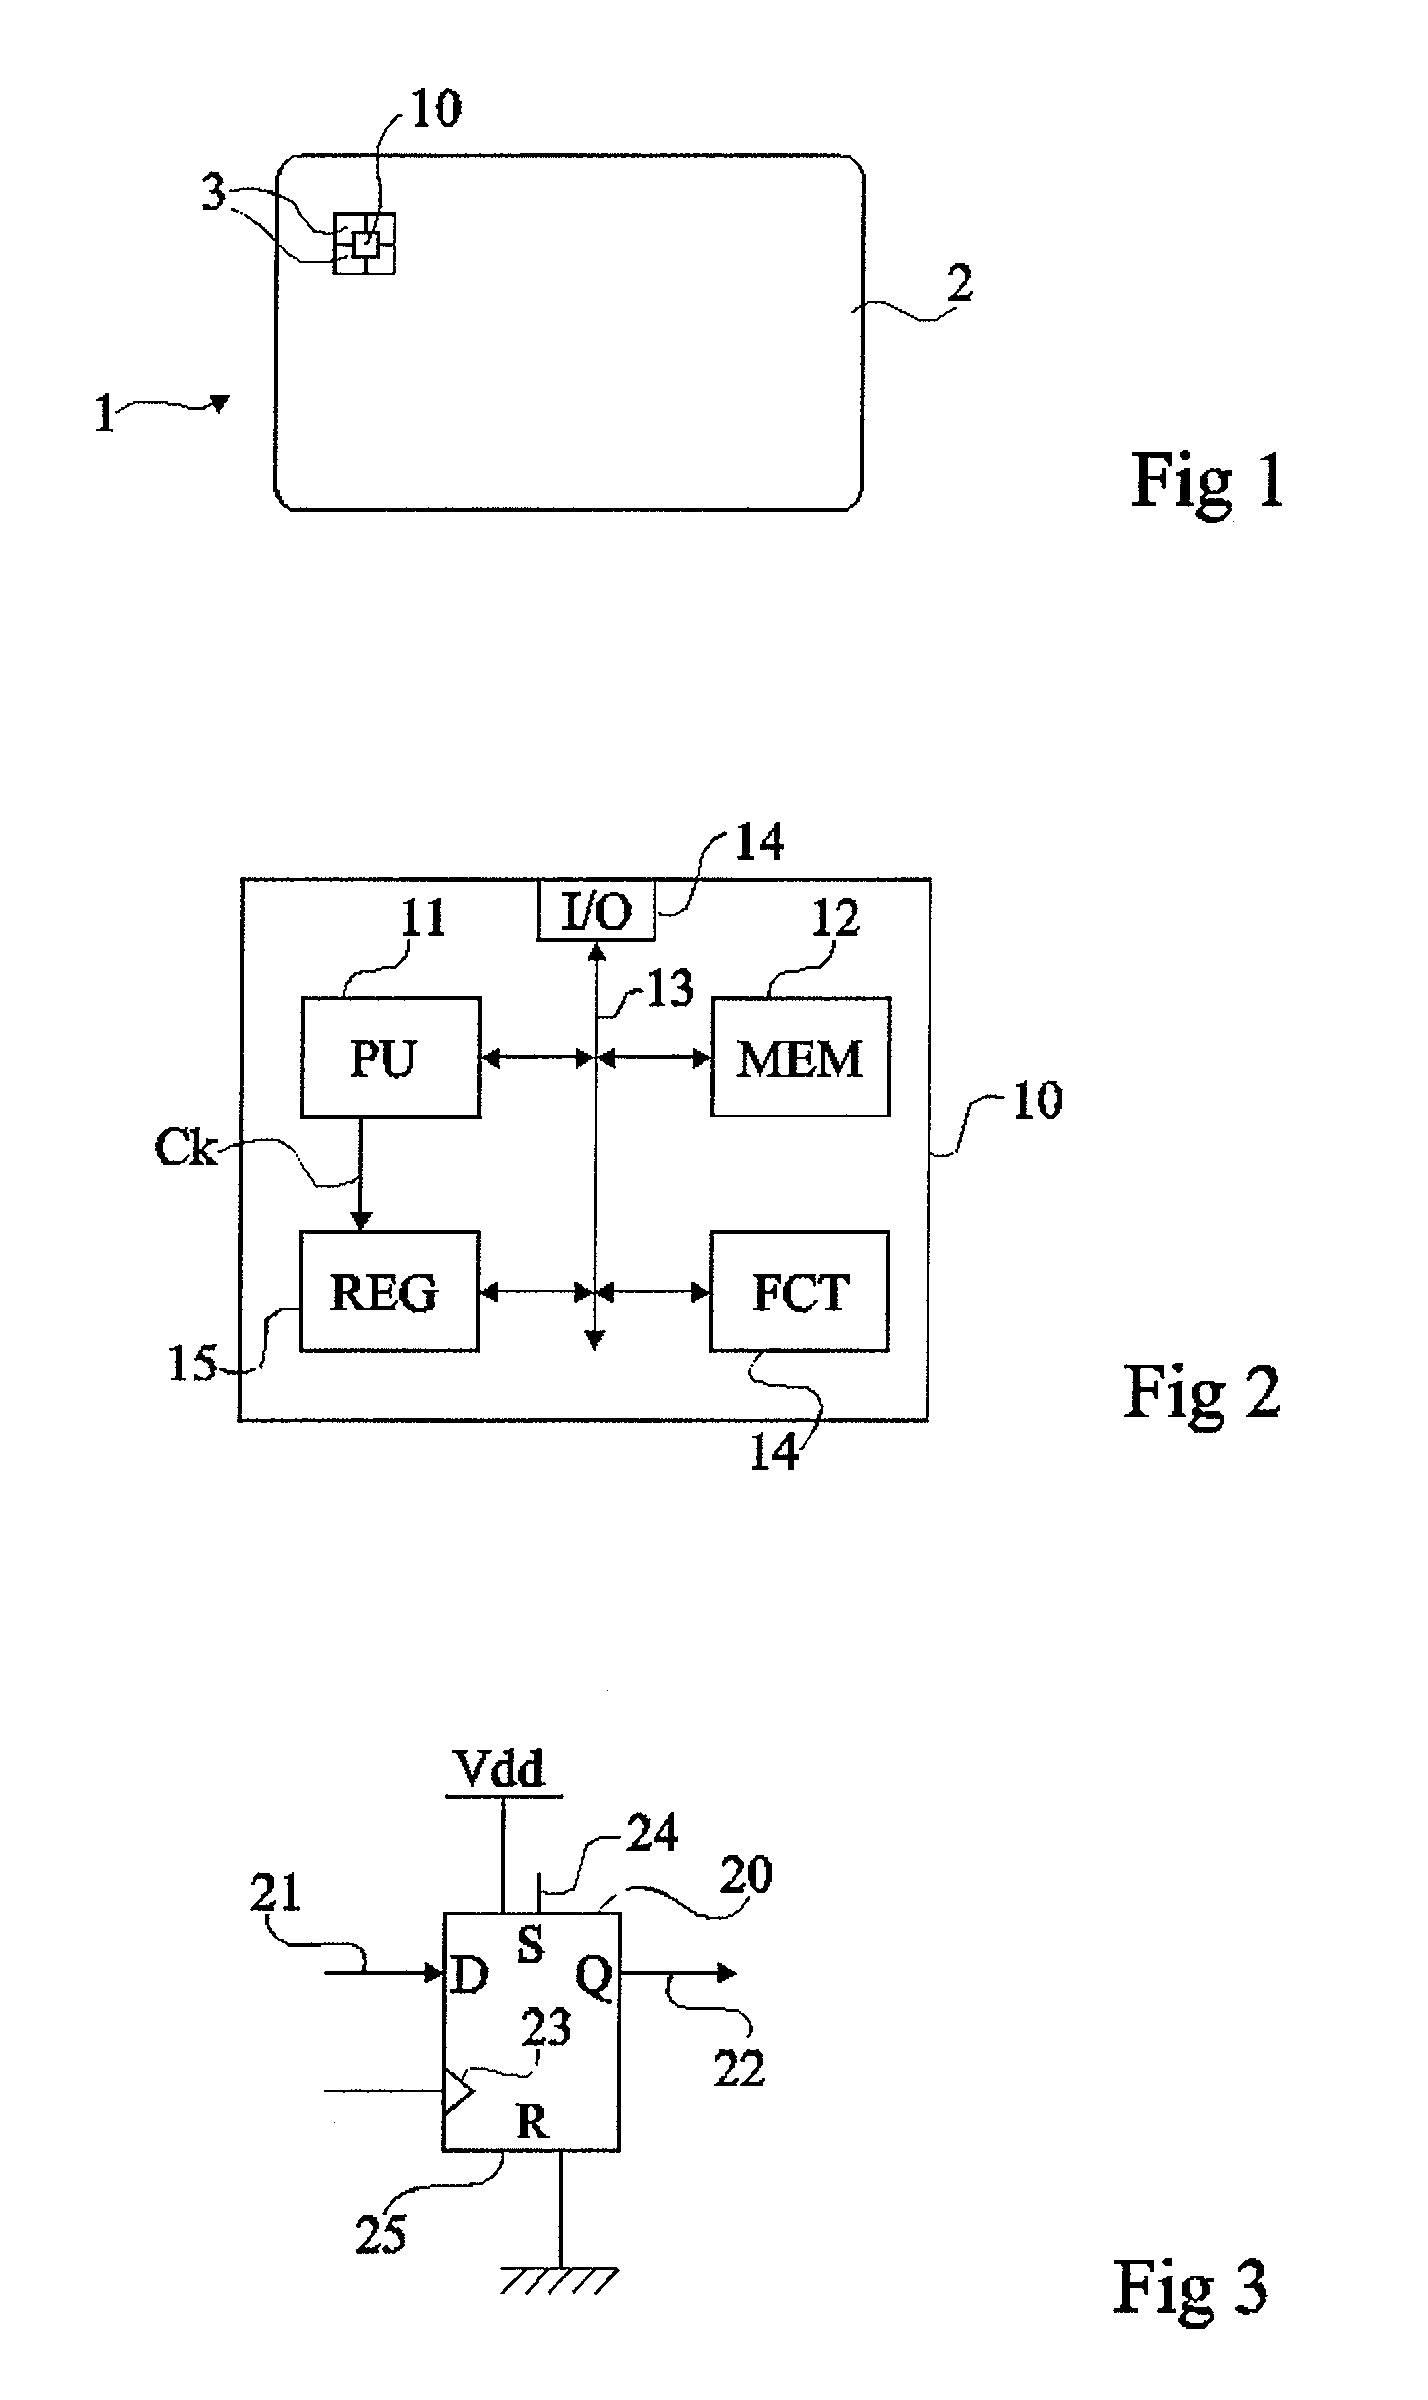 Detection of a disturbance in the state of an electronic circuit flip-flop